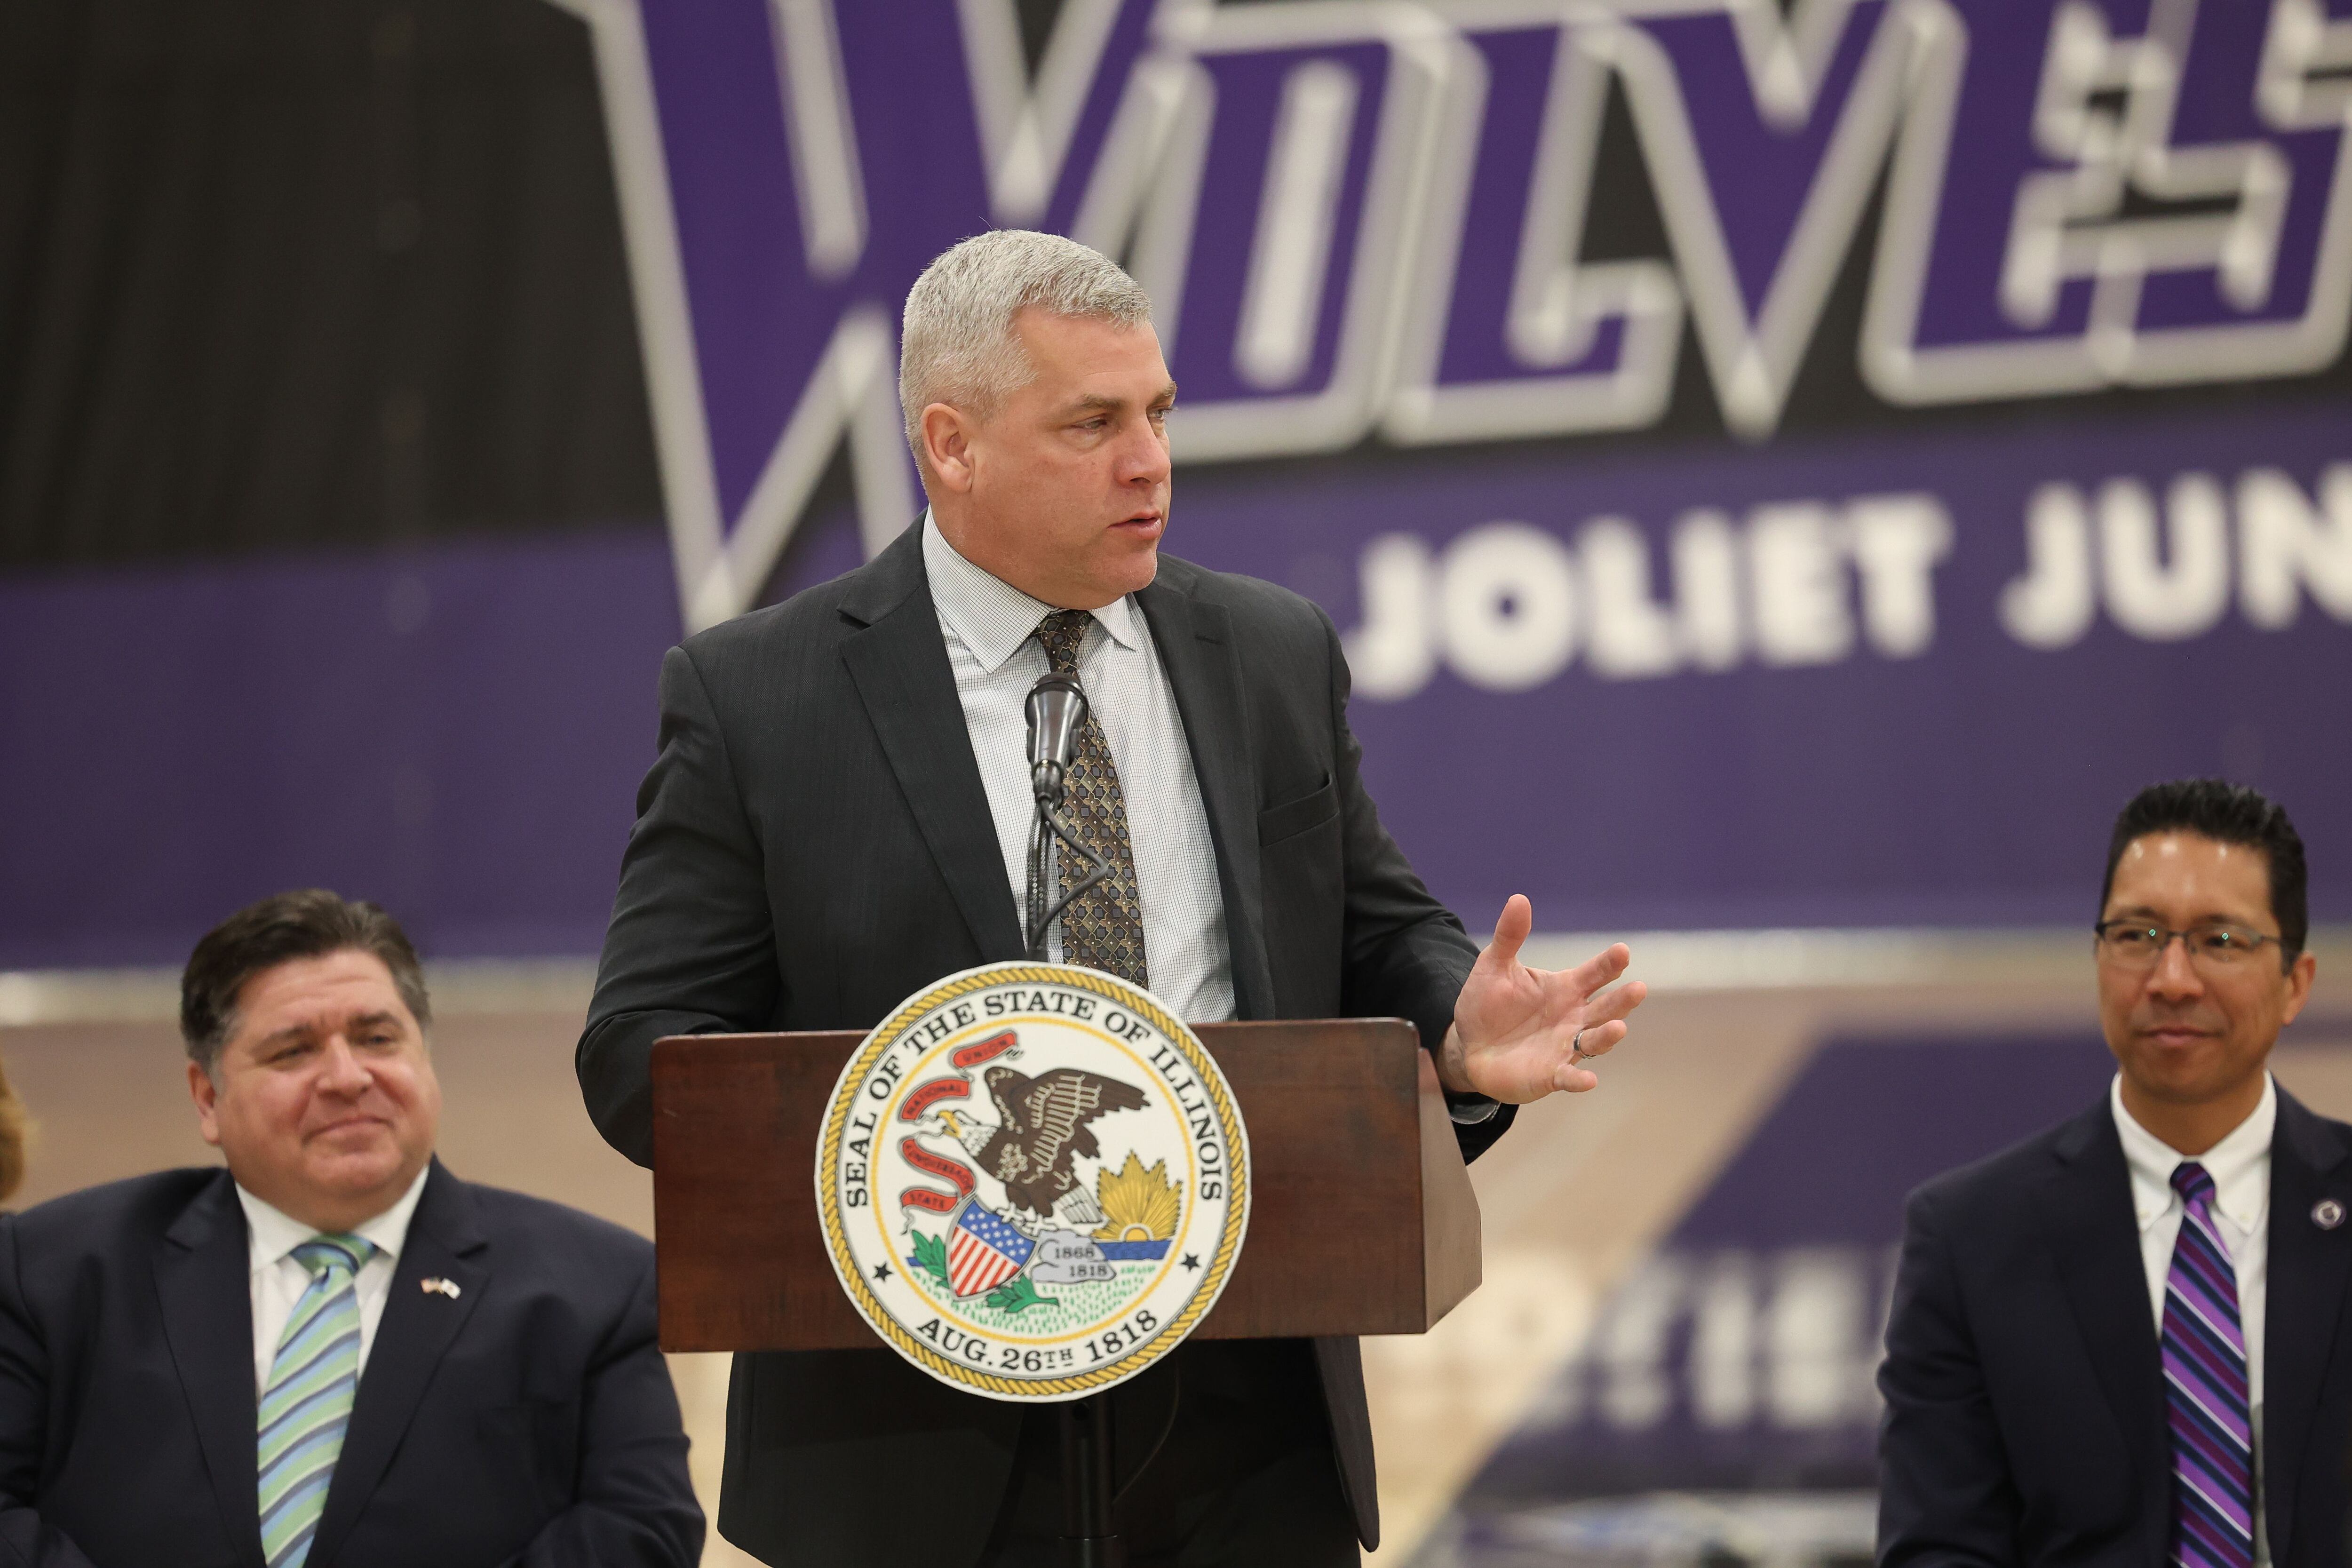 Joliet Mayor Bob O’Dekirk speaks at a press conference regarding the state’s proposed investment in higher education at Joliet Junior College on Thursday, March 16th, 2023.